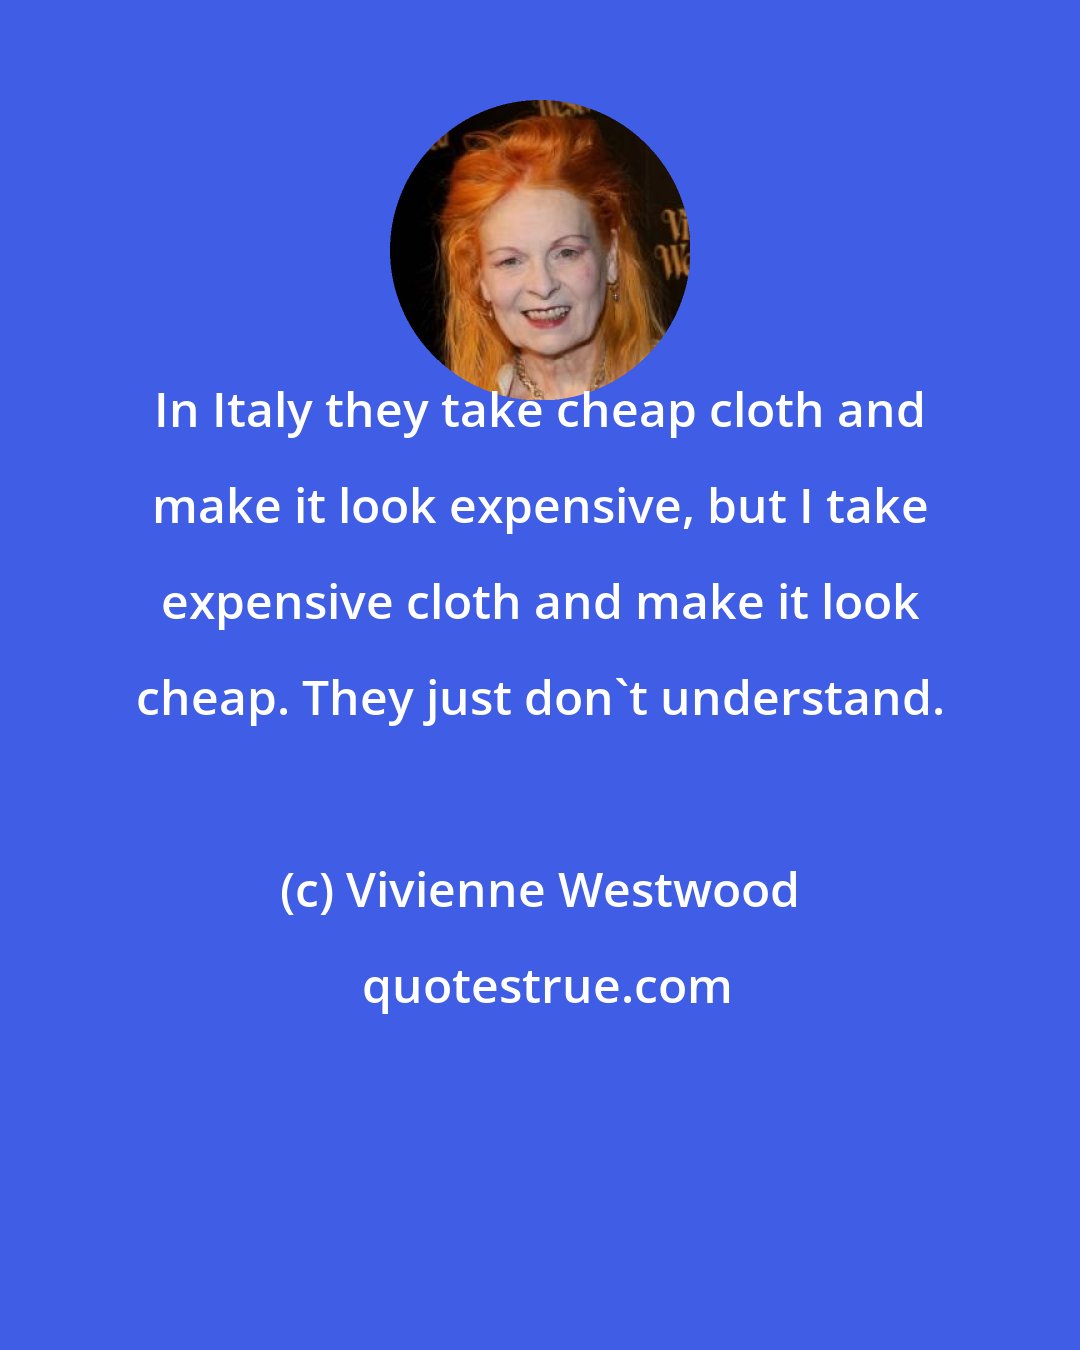 Vivienne Westwood: In Italy they take cheap cloth and make it look expensive, but I take expensive cloth and make it look cheap. They just don't understand.